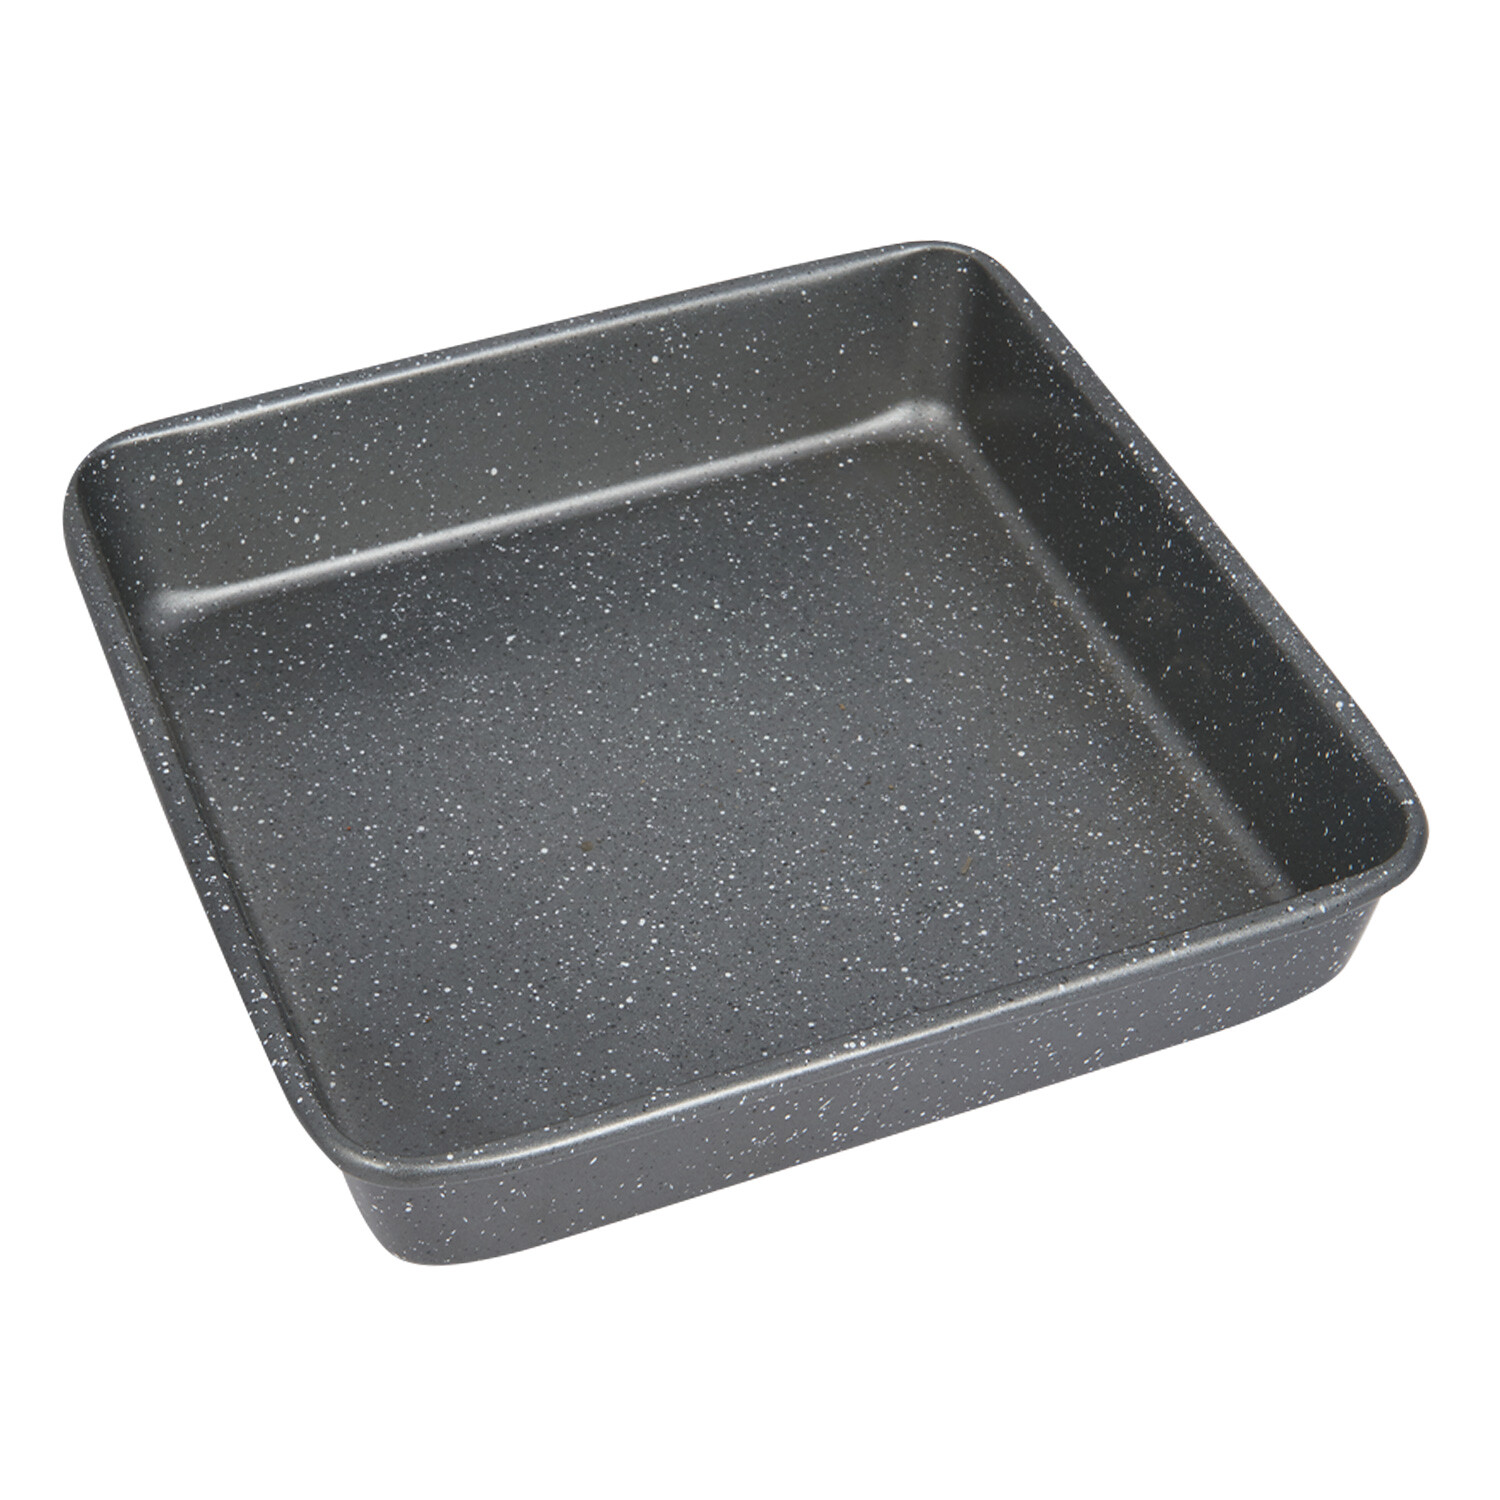 Marble Collection Large Square Cake Pan - Grey Image 2